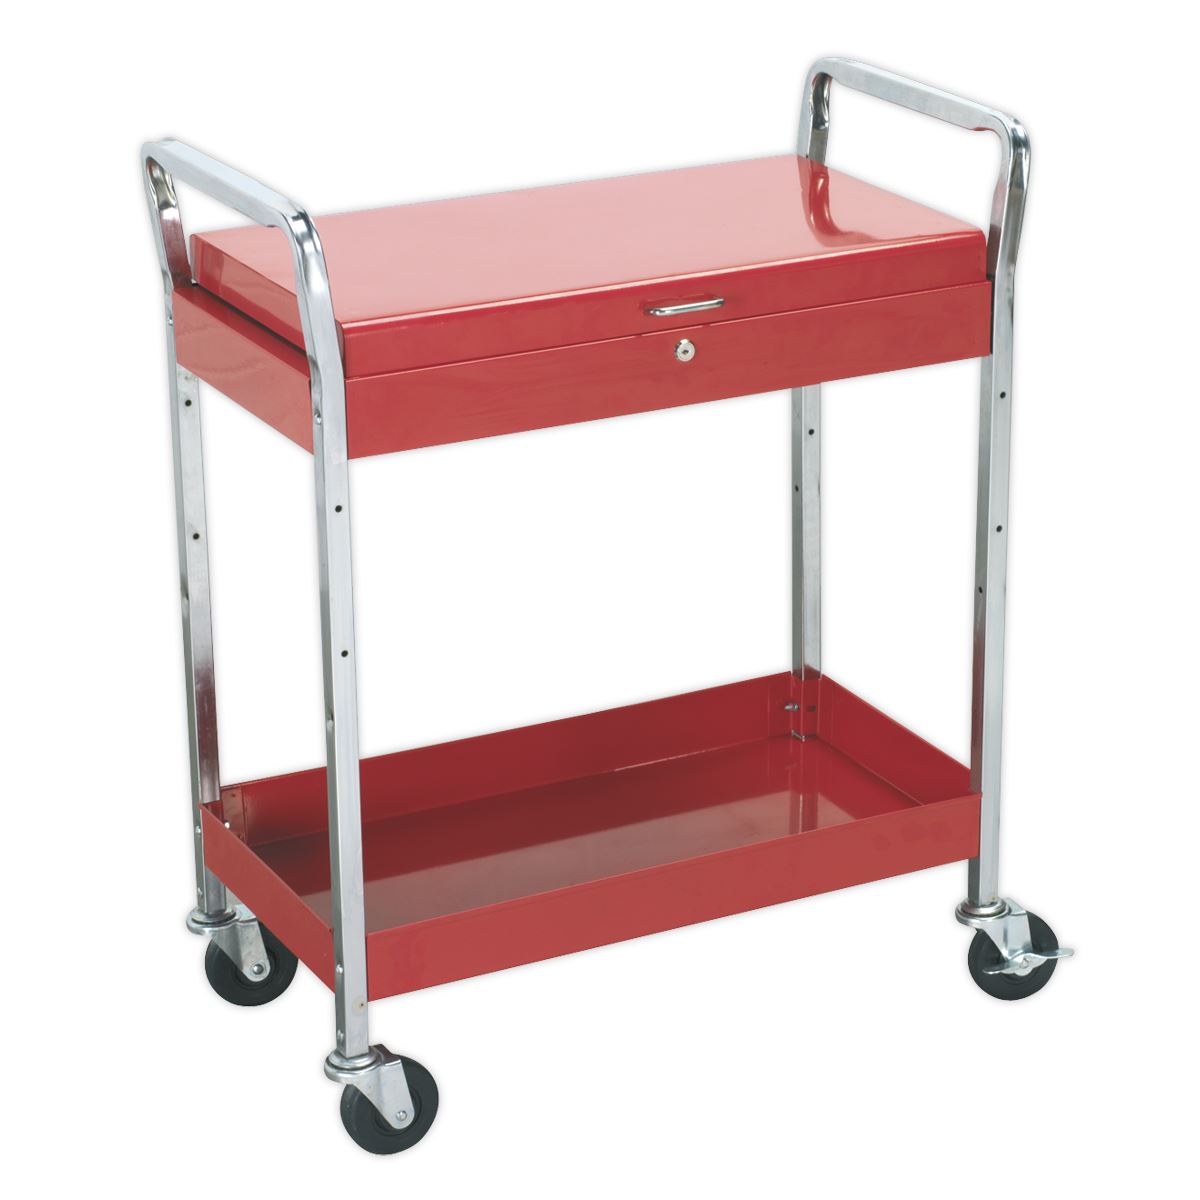 Sealey Superline Pro Trolley 2-Level Heavy-Duty with Lockable Top